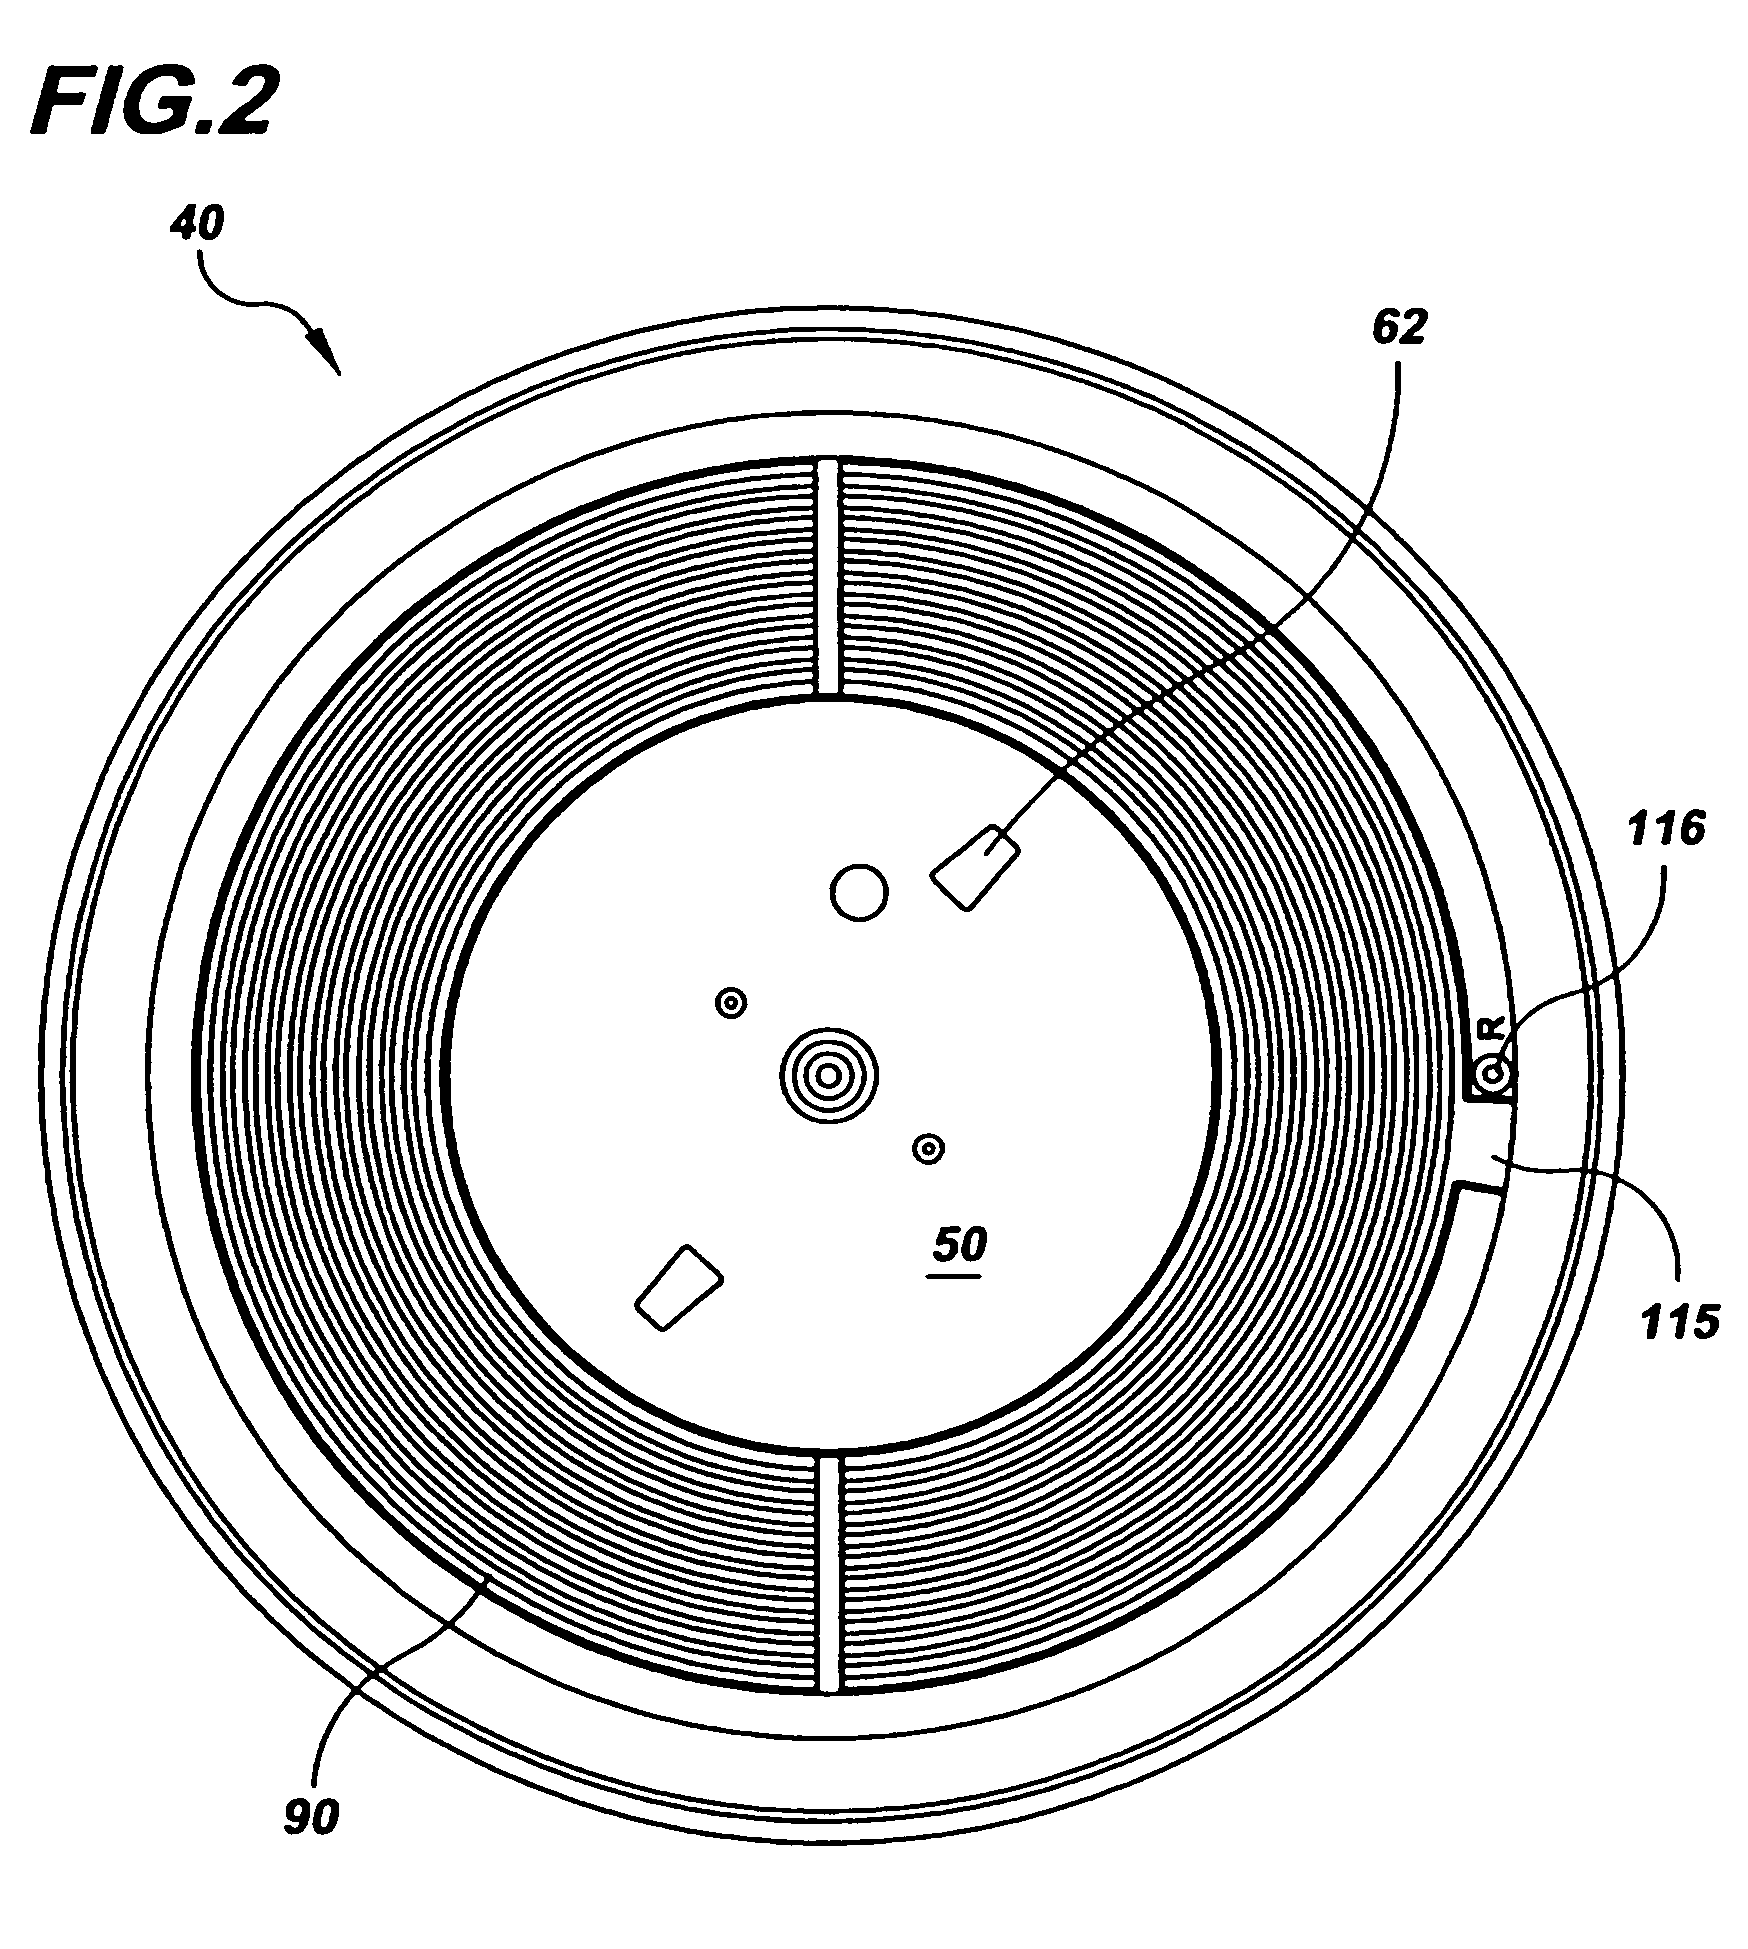 Inclusion of an anti-drain valve in viscous fan clutches